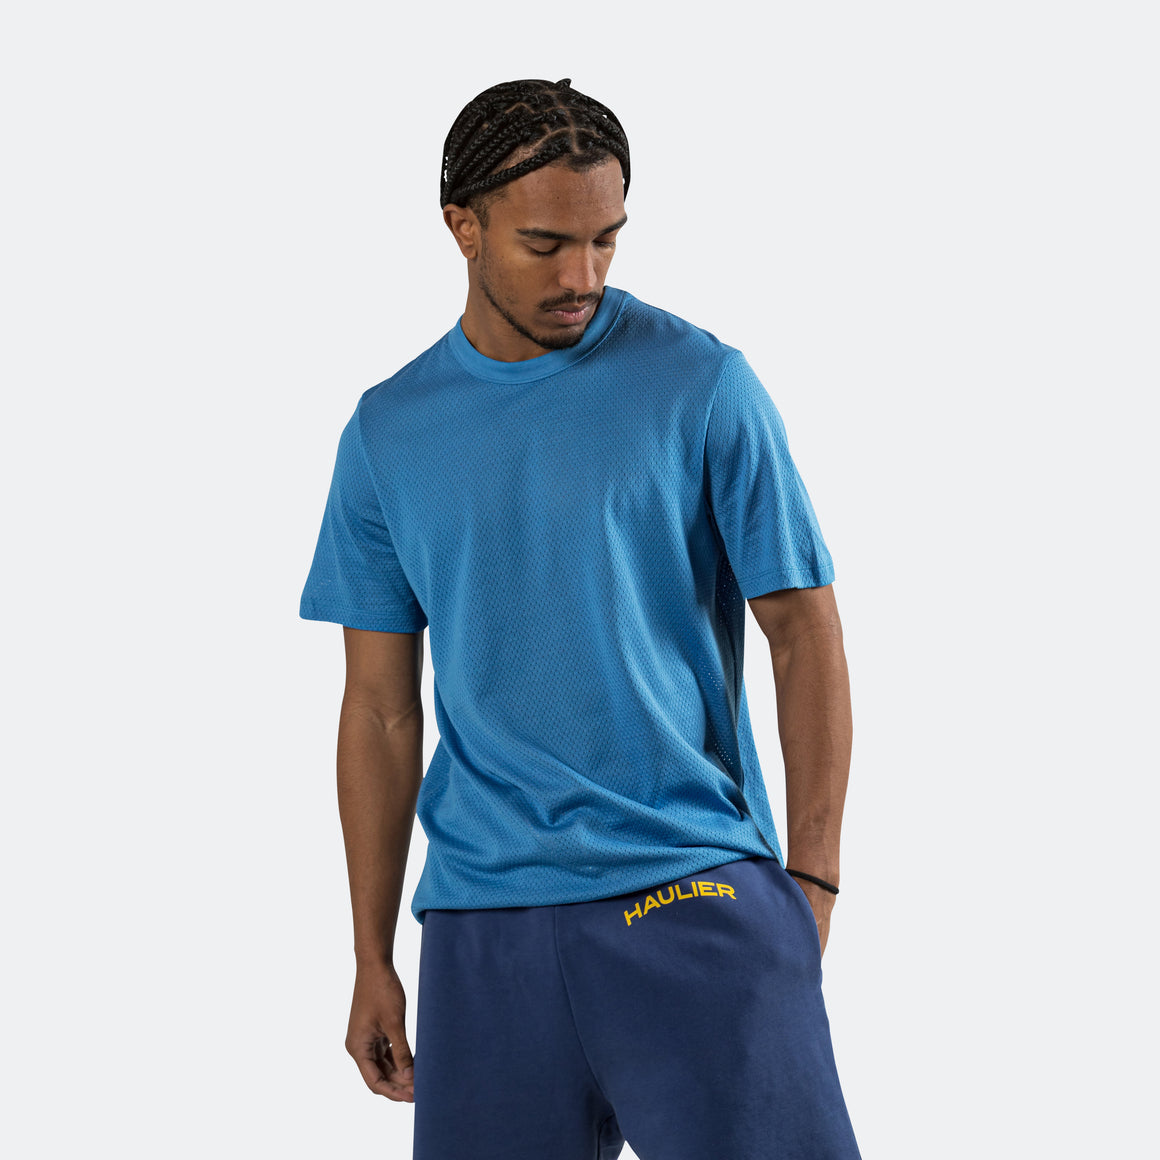 Haulier International - Marvin Mesh Tee - Sapphire Blue - UP THERE